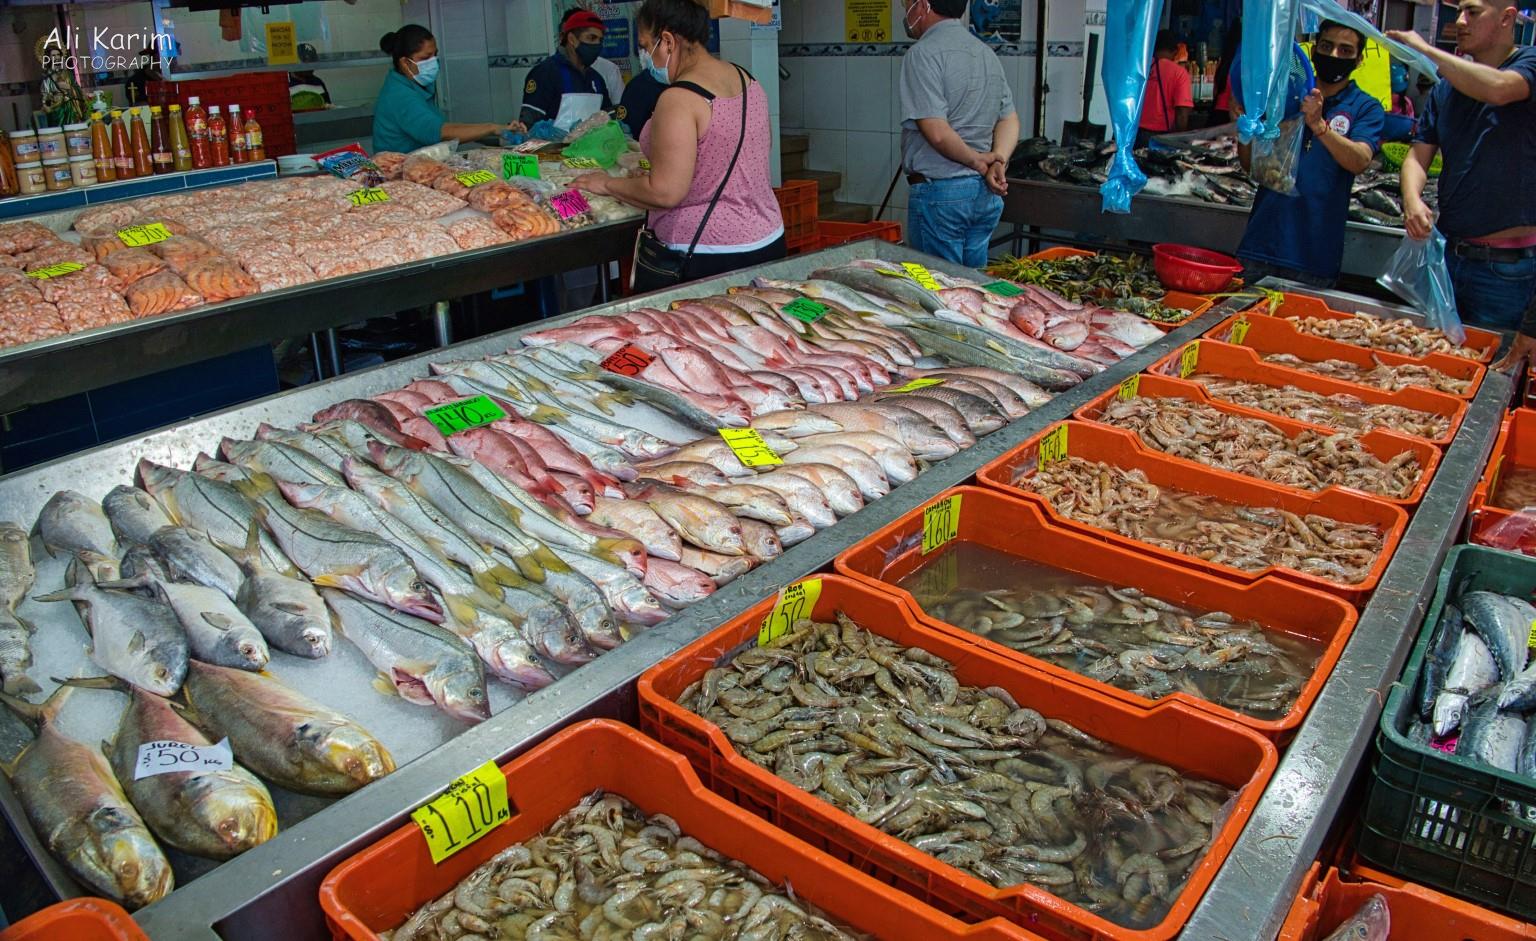 Veracruz, Mexico, December 2020, Lots of different fish and shrimps. Mojarra, huachinago and robalo were popular fishes